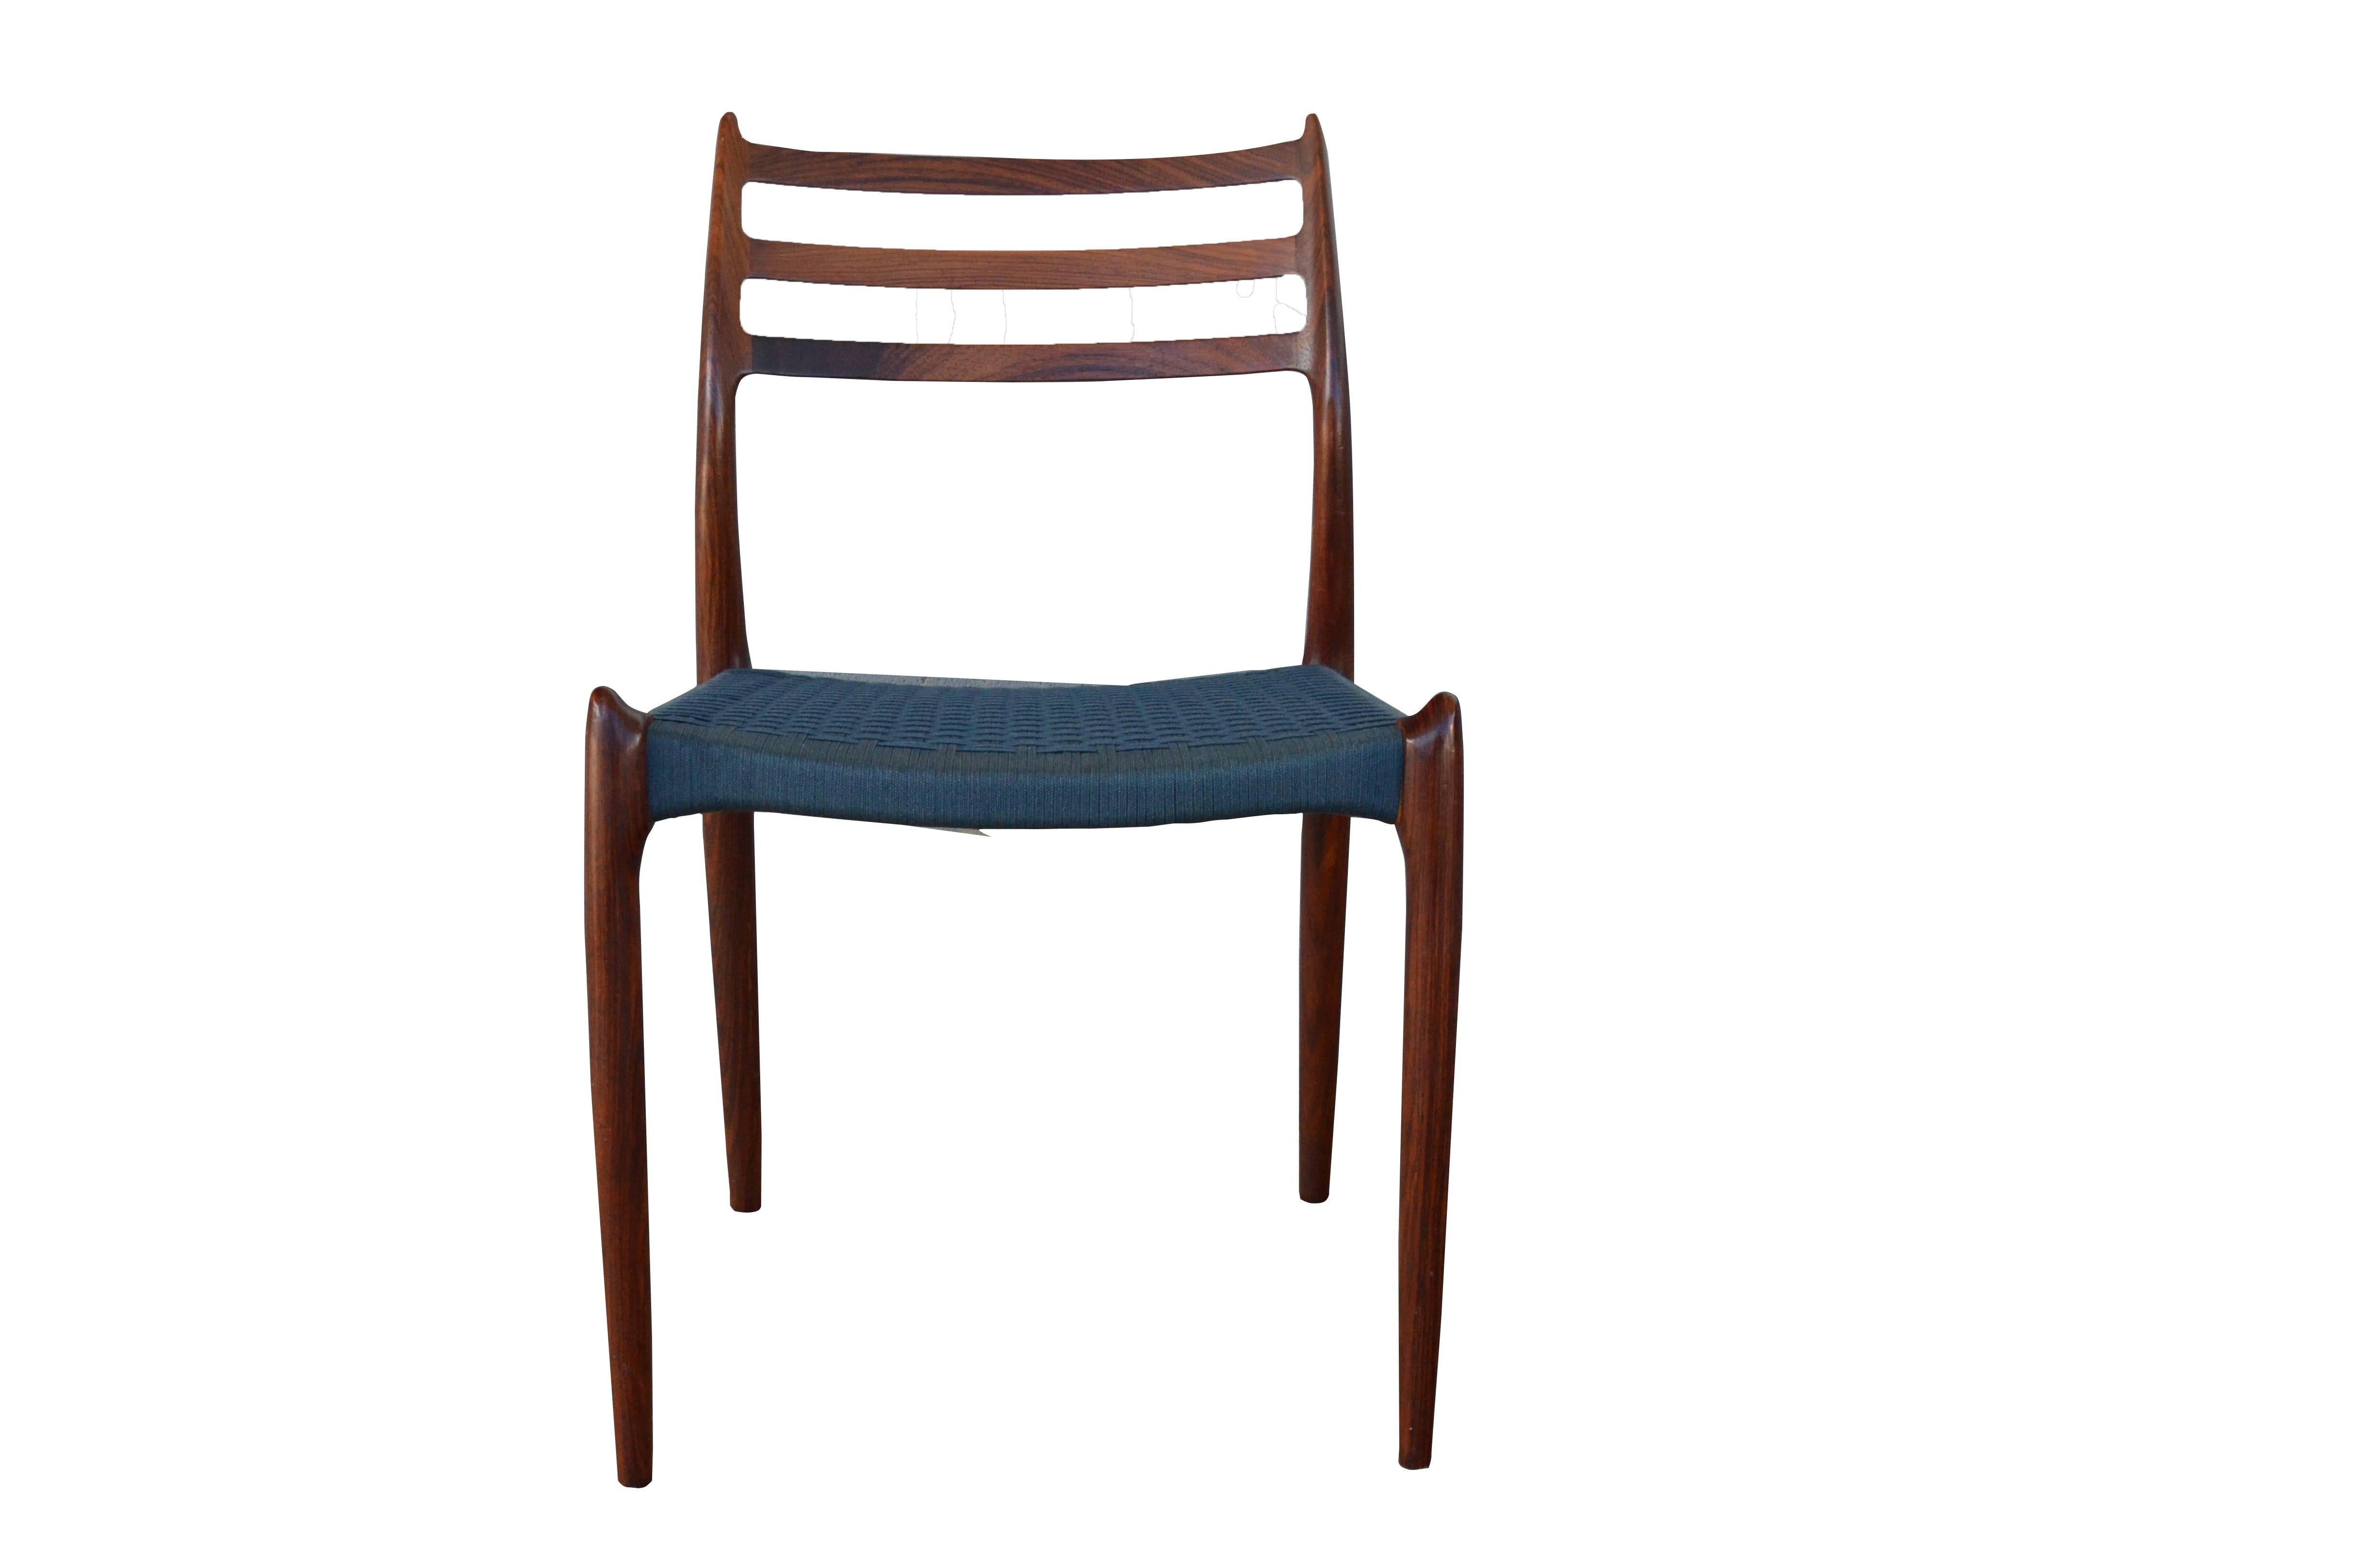 Danish Niels Otto Moller Rosewood Dining Chairs #62 and #78 with Original Cord Seats